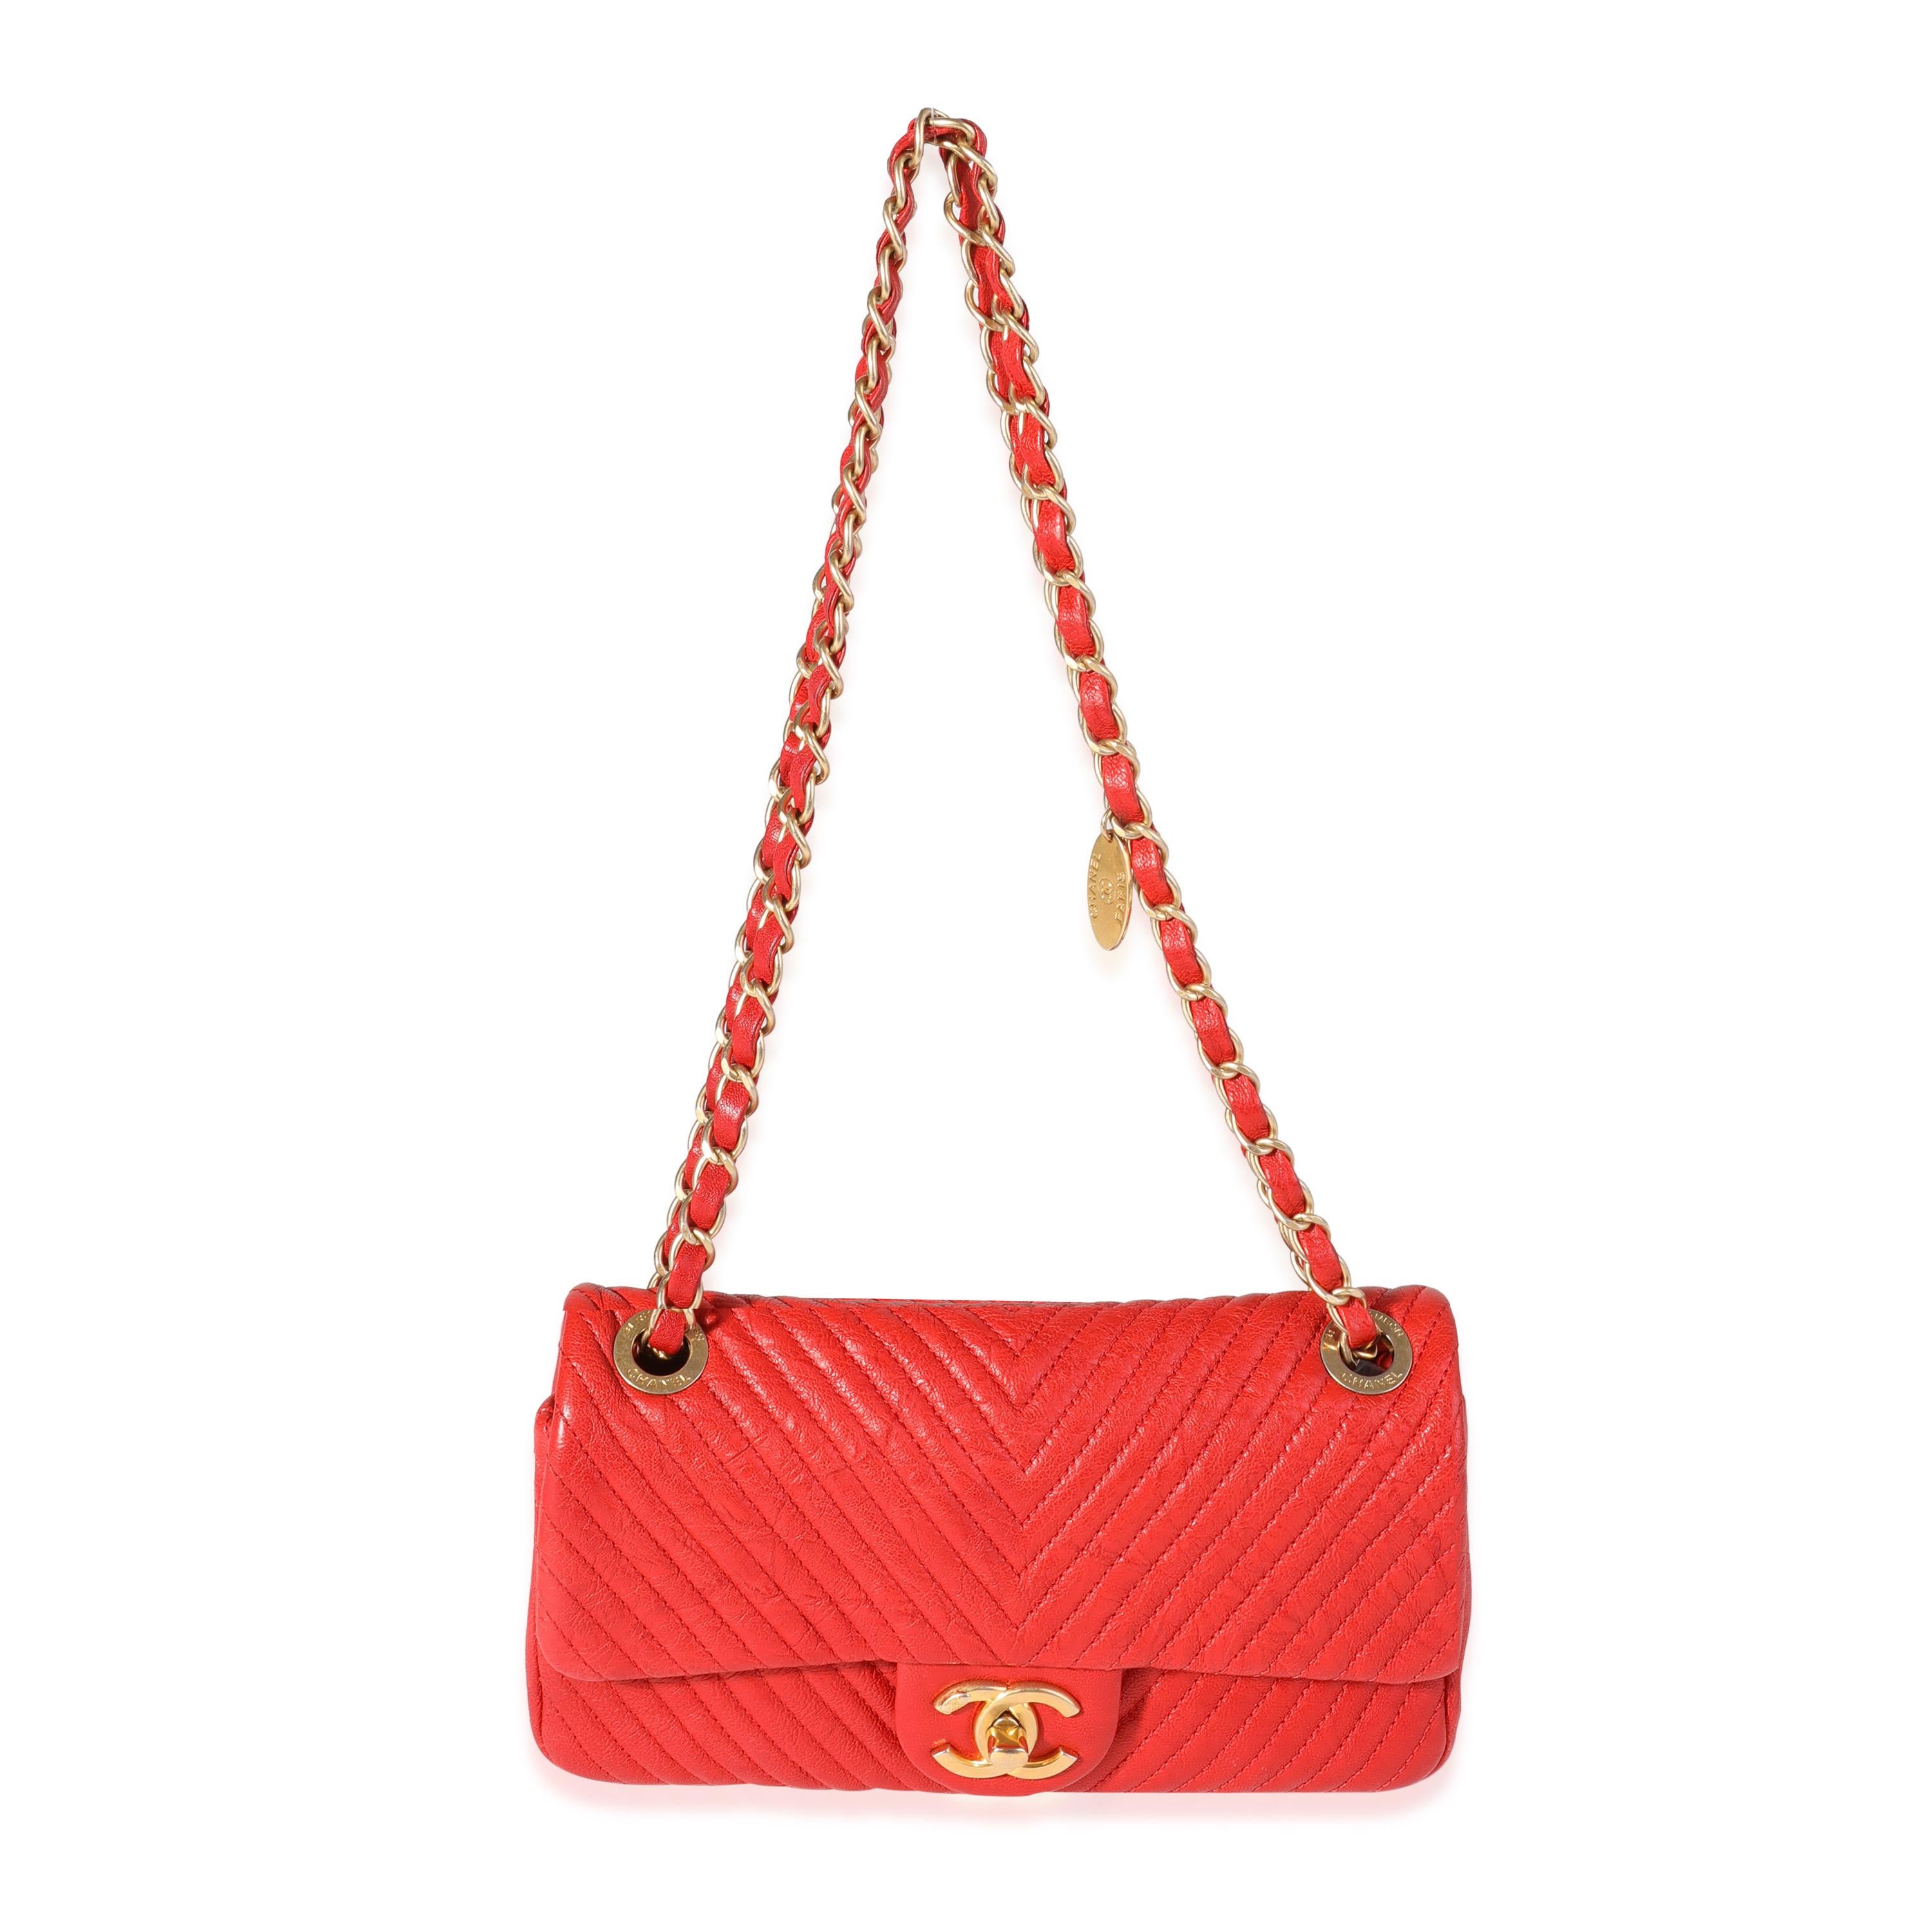 Listing Title: Chanel Red Chevron Wrinkled Leather Mini Rectangular Medallion Flap Bag
SKU: 120471
Condition: Pre-owned (3000)
Handbag Condition: Very Good
Condition Comments: Very Good Condition. Discoloration and scuffing to exterior leather.